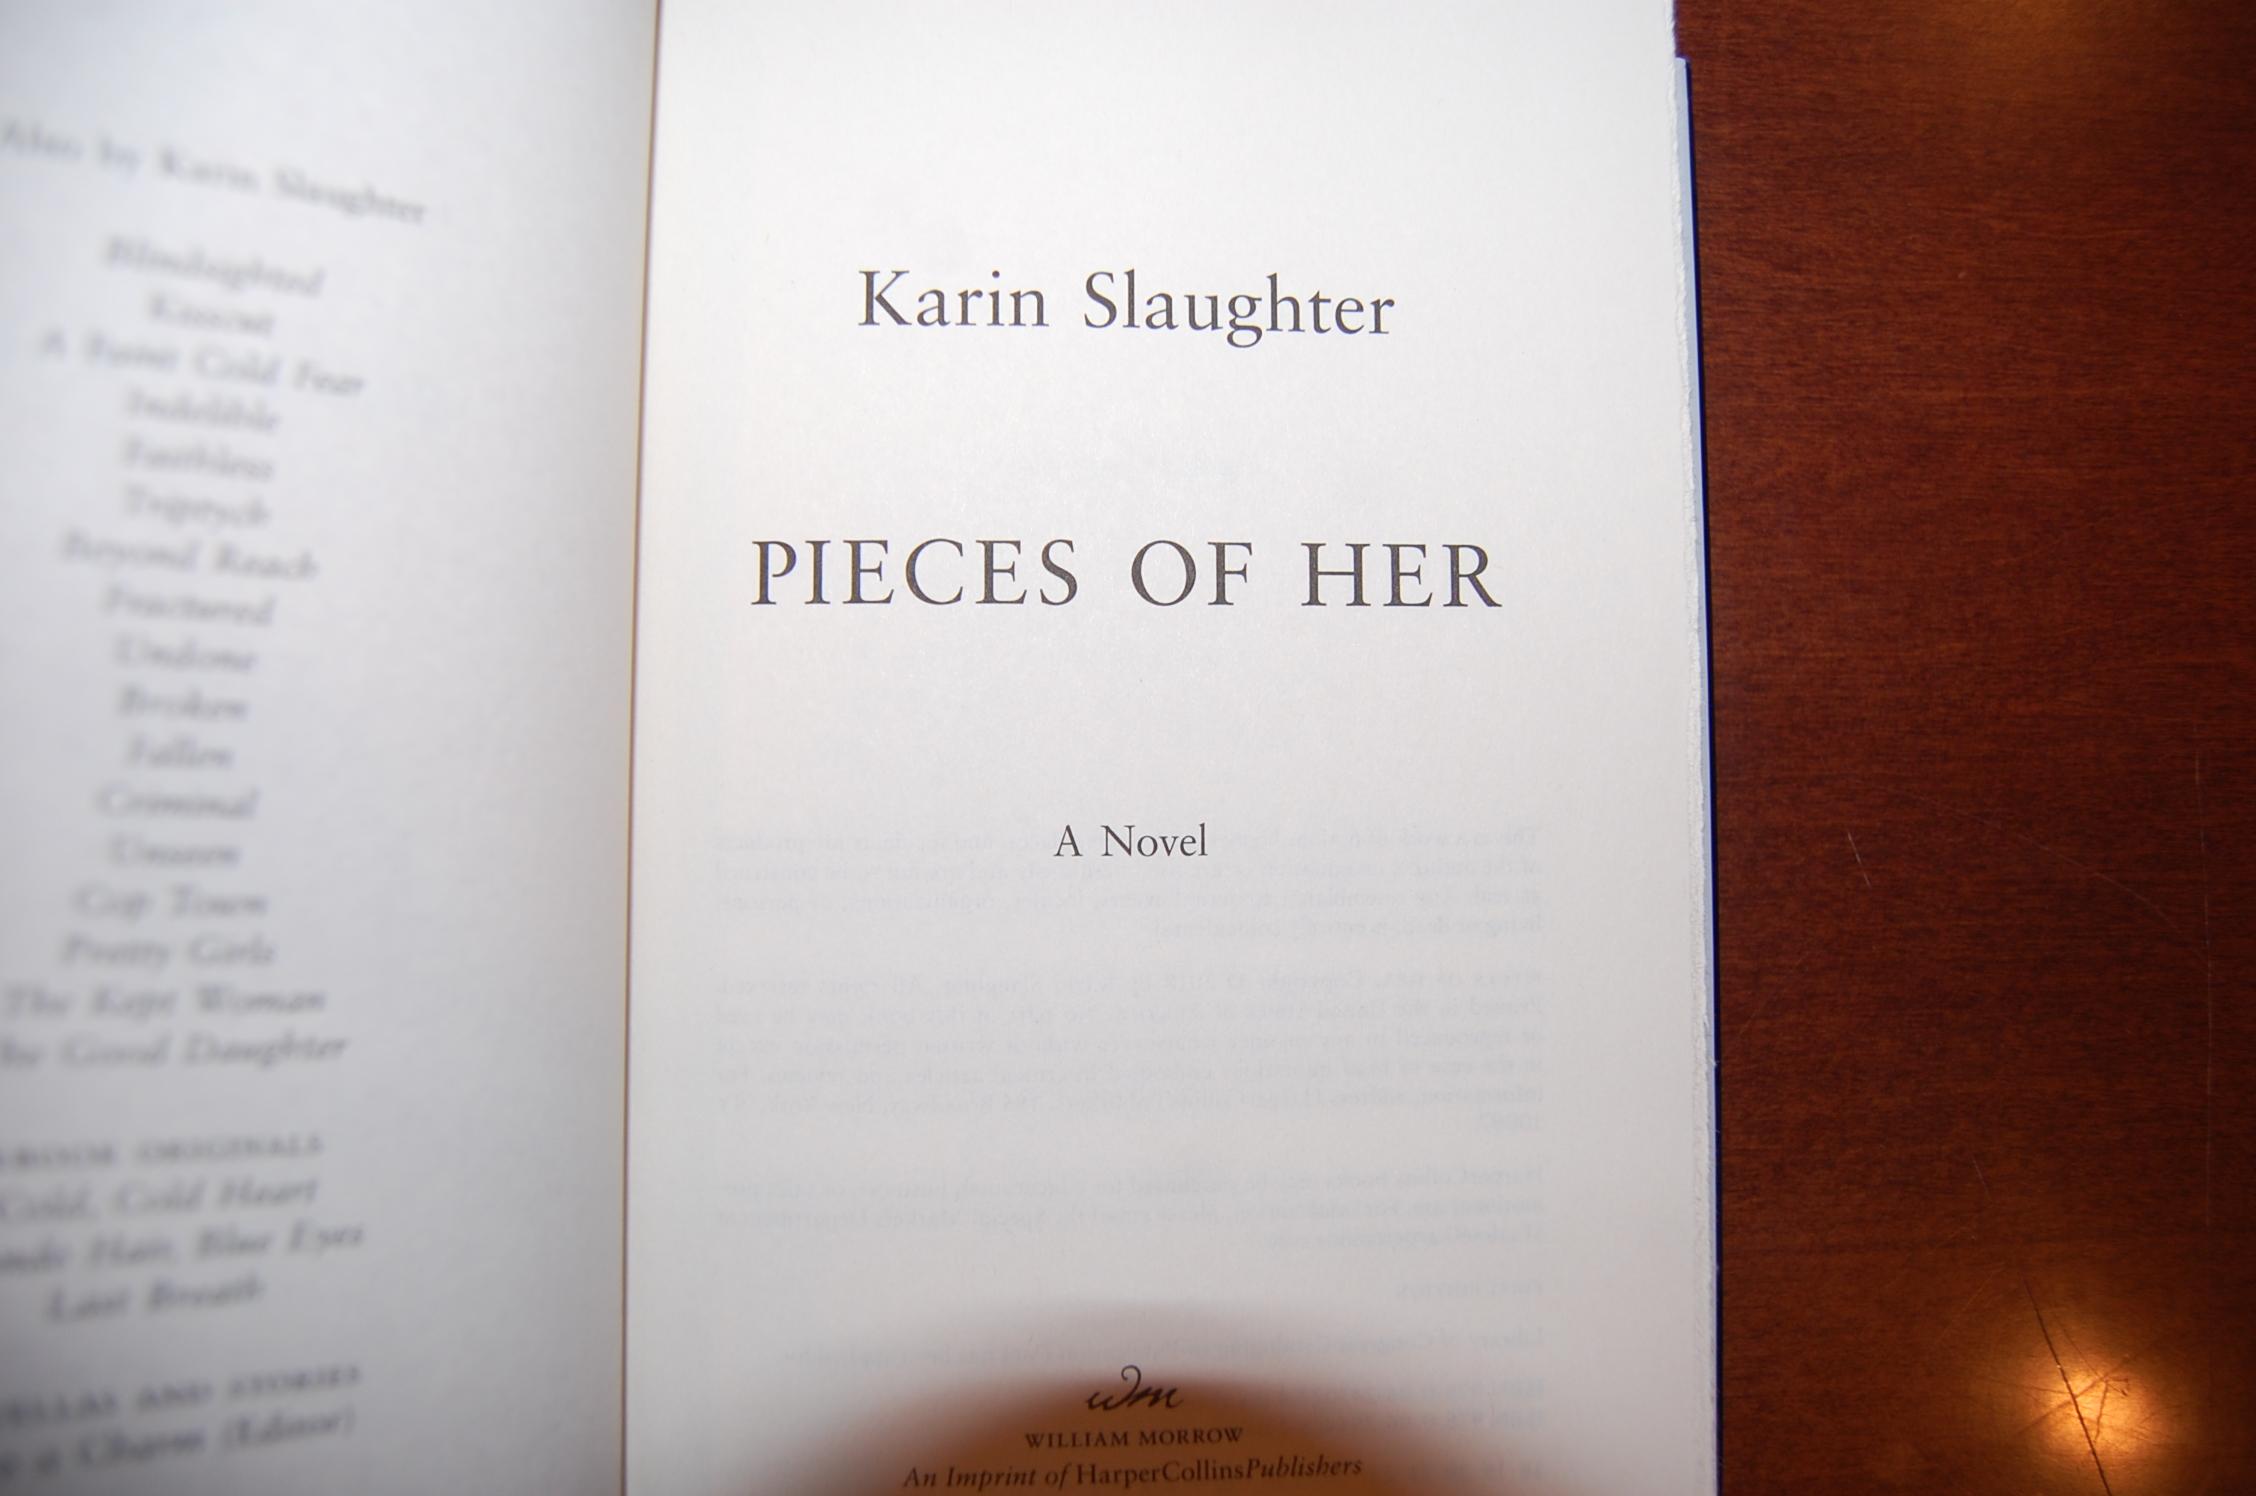 Pieces of Her - Reprint by Karin Slaughter (Paperback)